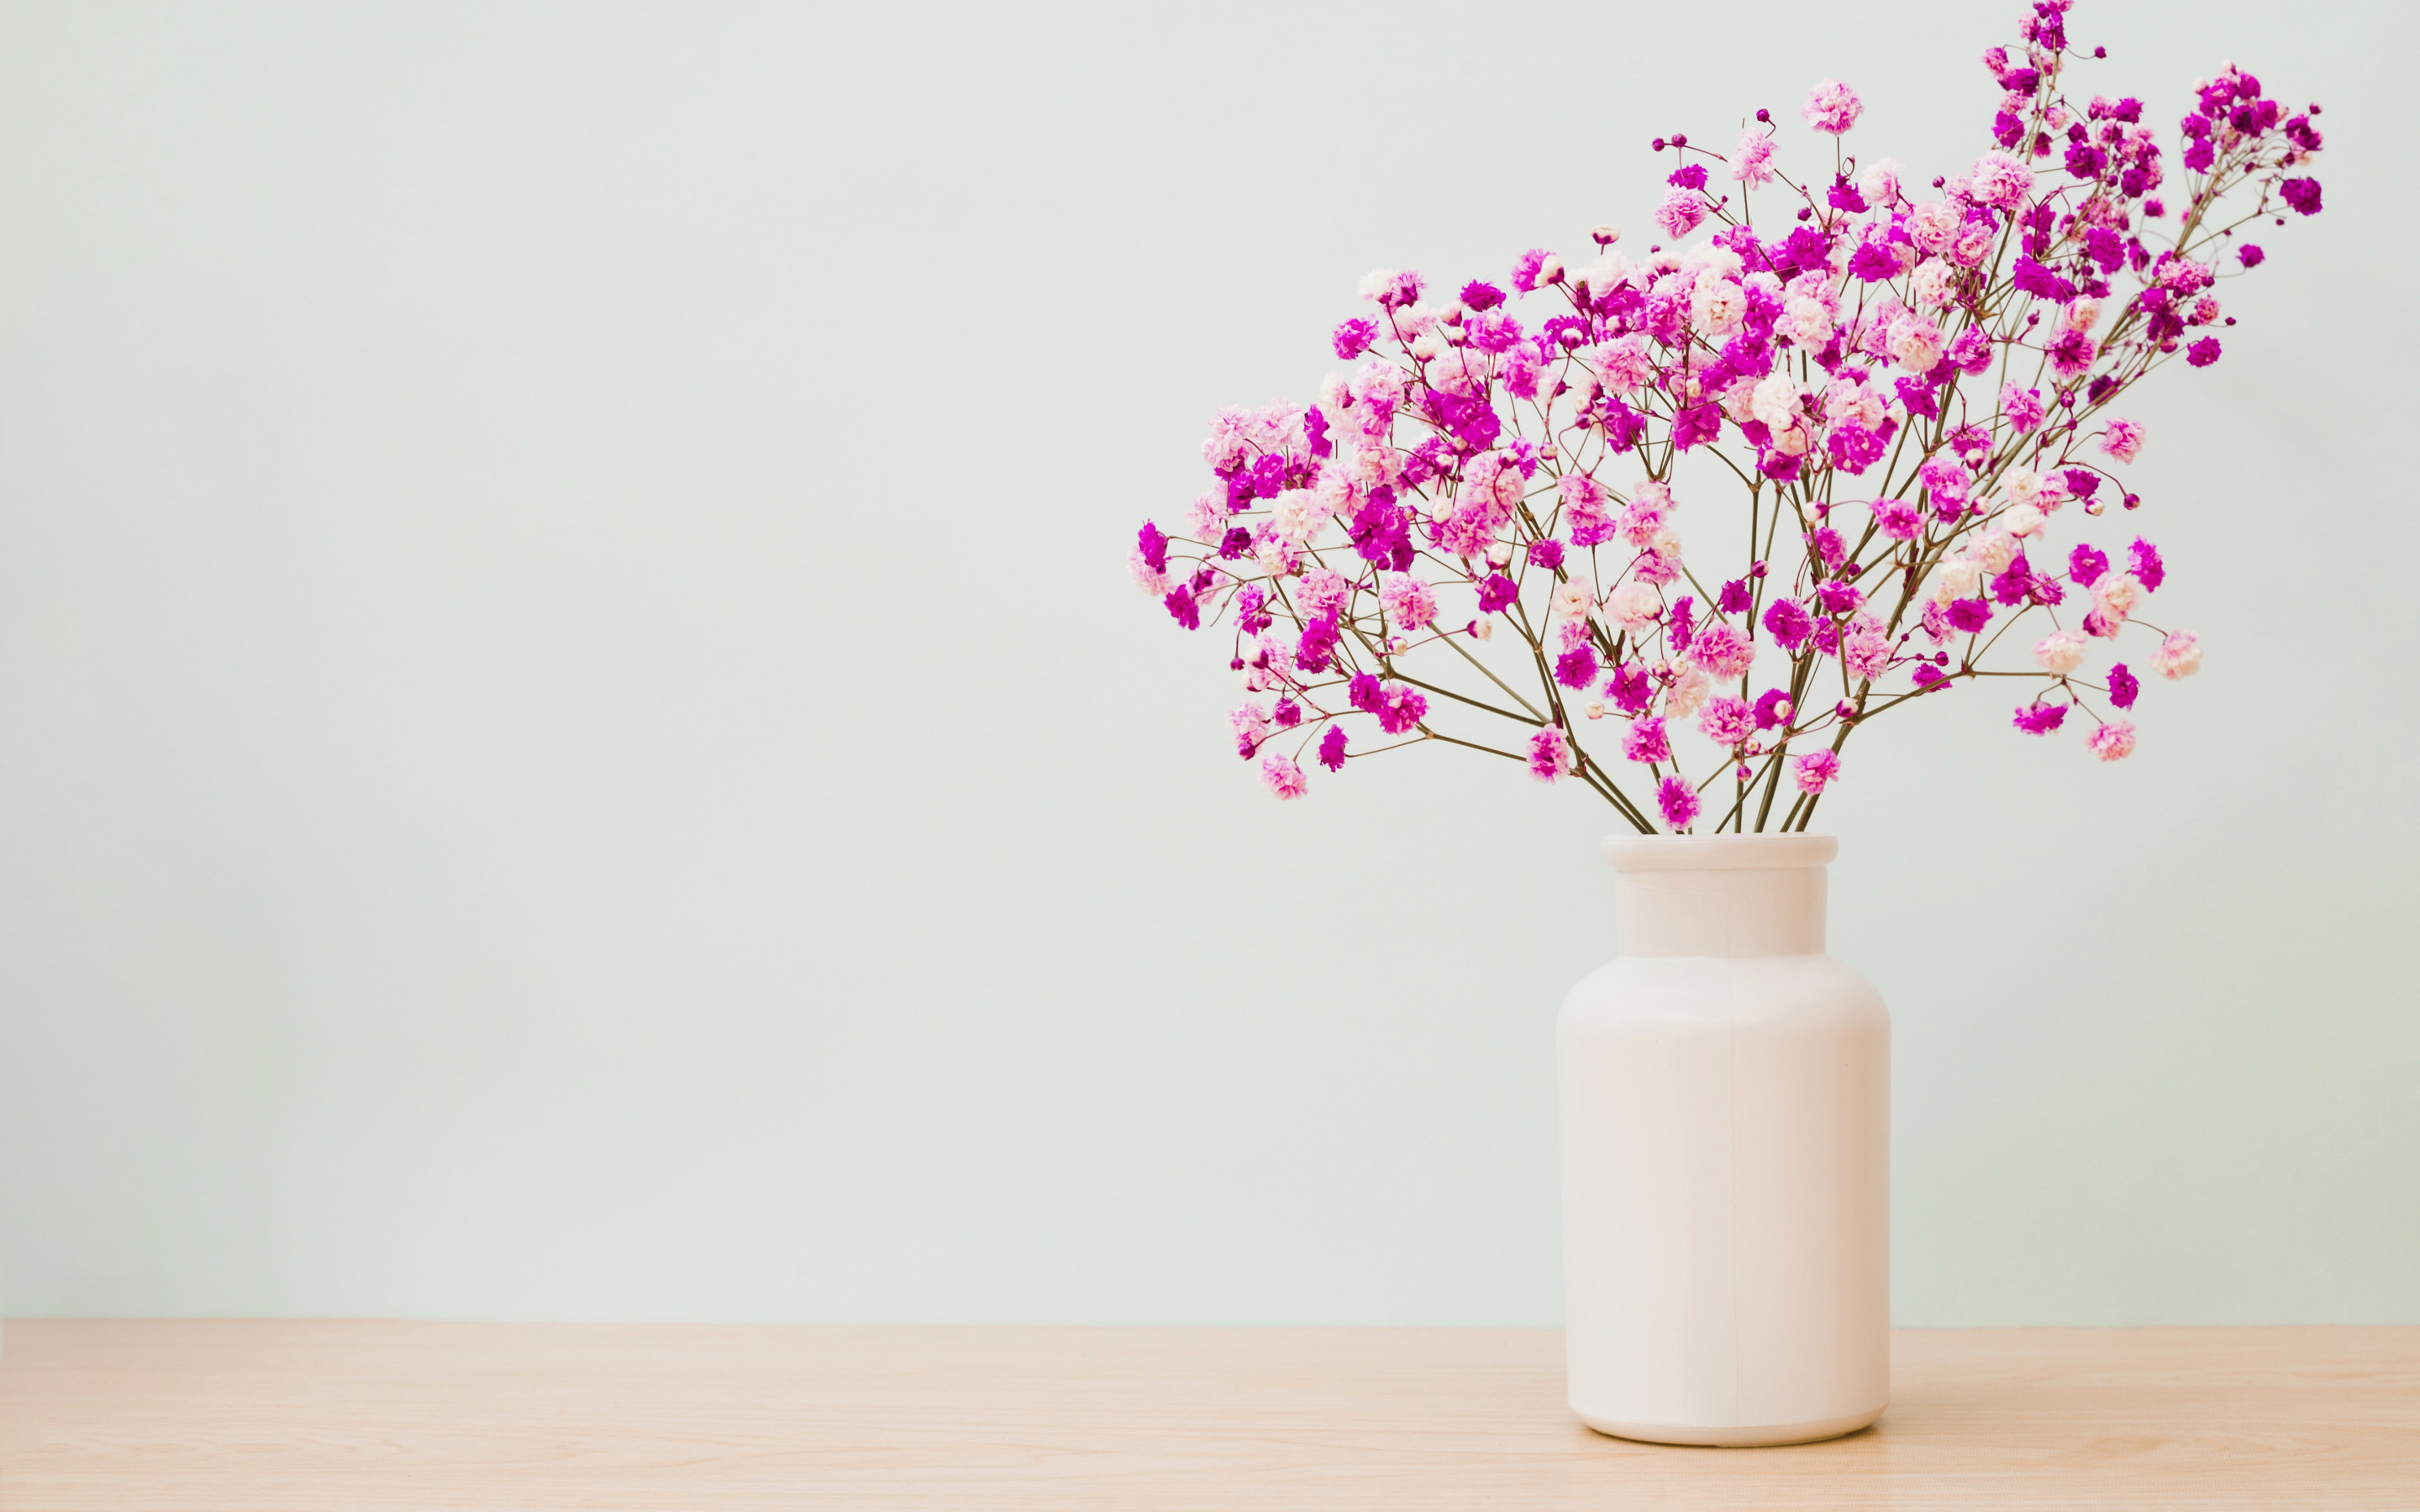 Download wallpaper purple spring flowers, flower vase, stylish pink vase, flowers on the table, spring, beautiful flowers for desktop with resolution 2880x1800. High Quality HD picture wallpaper